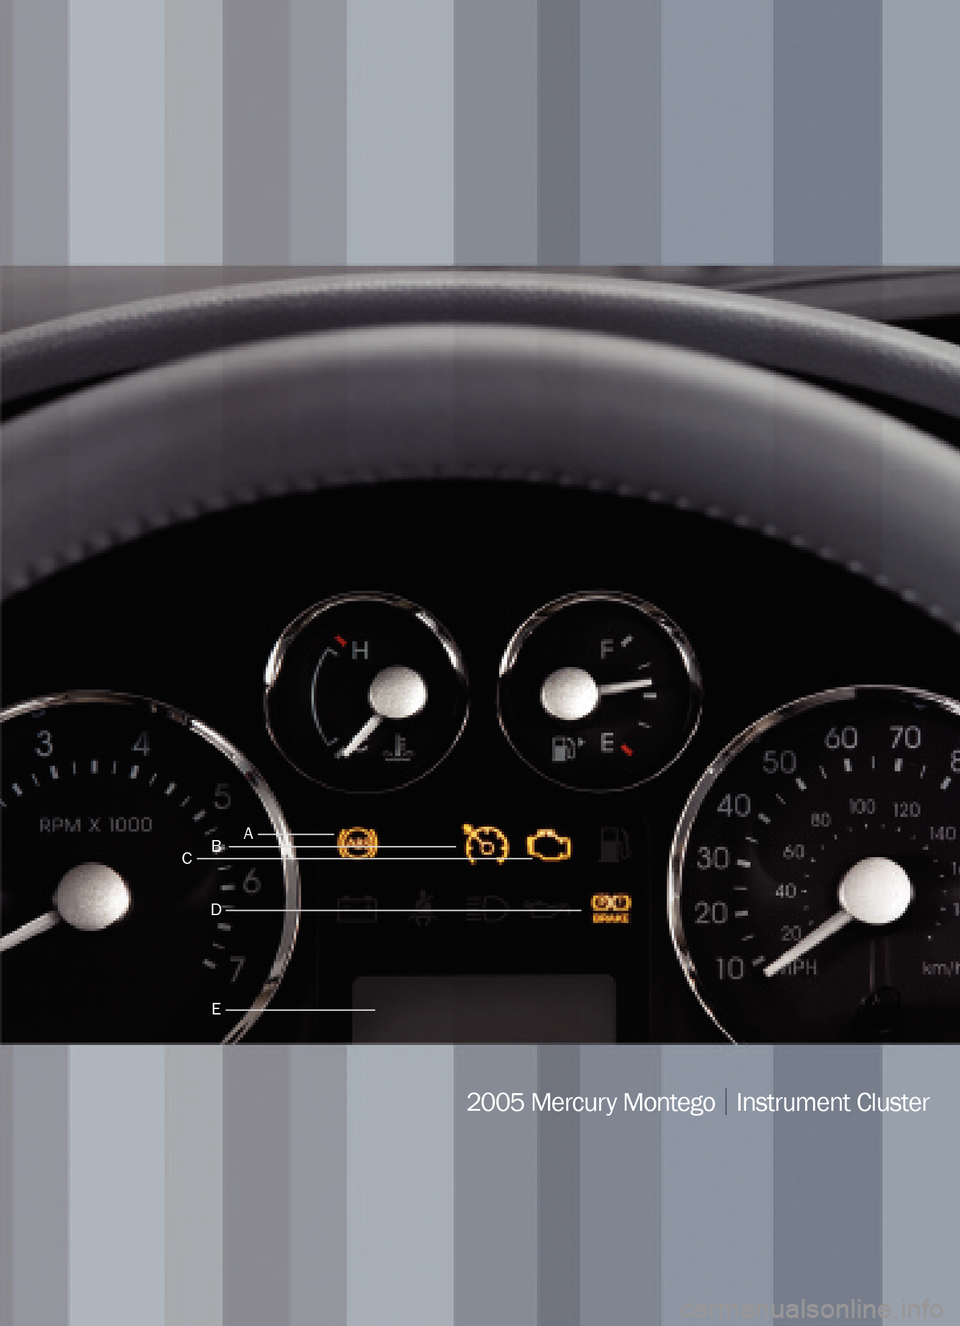 Mercury Montego 2005  Quick Reference Guide 2005 Mercury Montego|Instrument Cluster
A
E
DB
C 